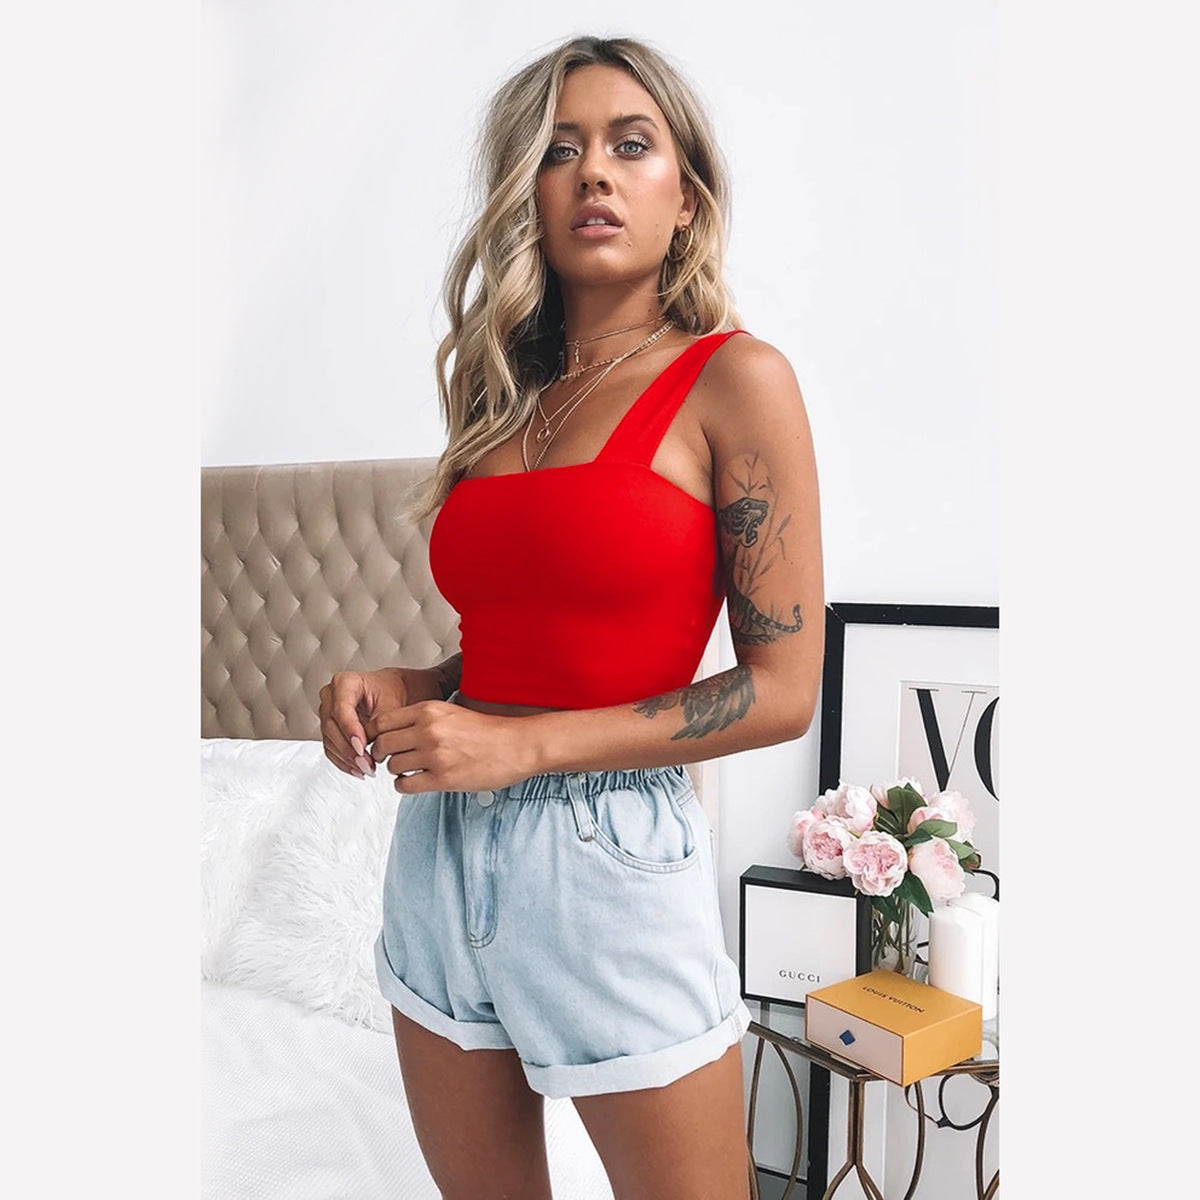 Square Neck Cropped Top